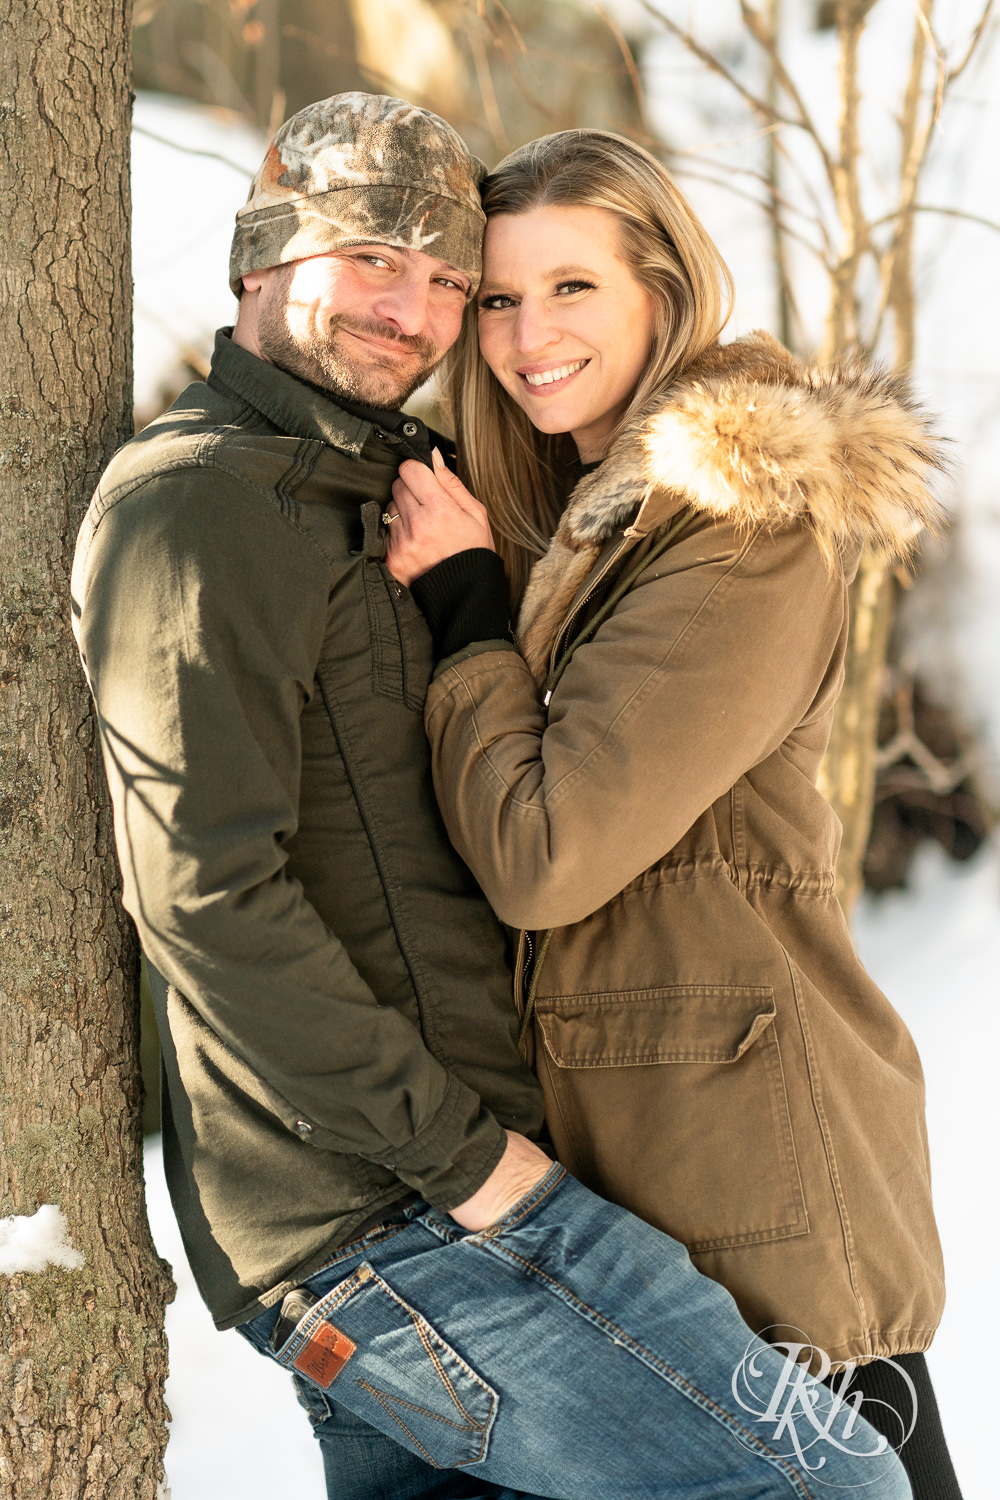 Man in jeans and woman in black dress smile at sunrise during Taylor's Falls engagement photography session.